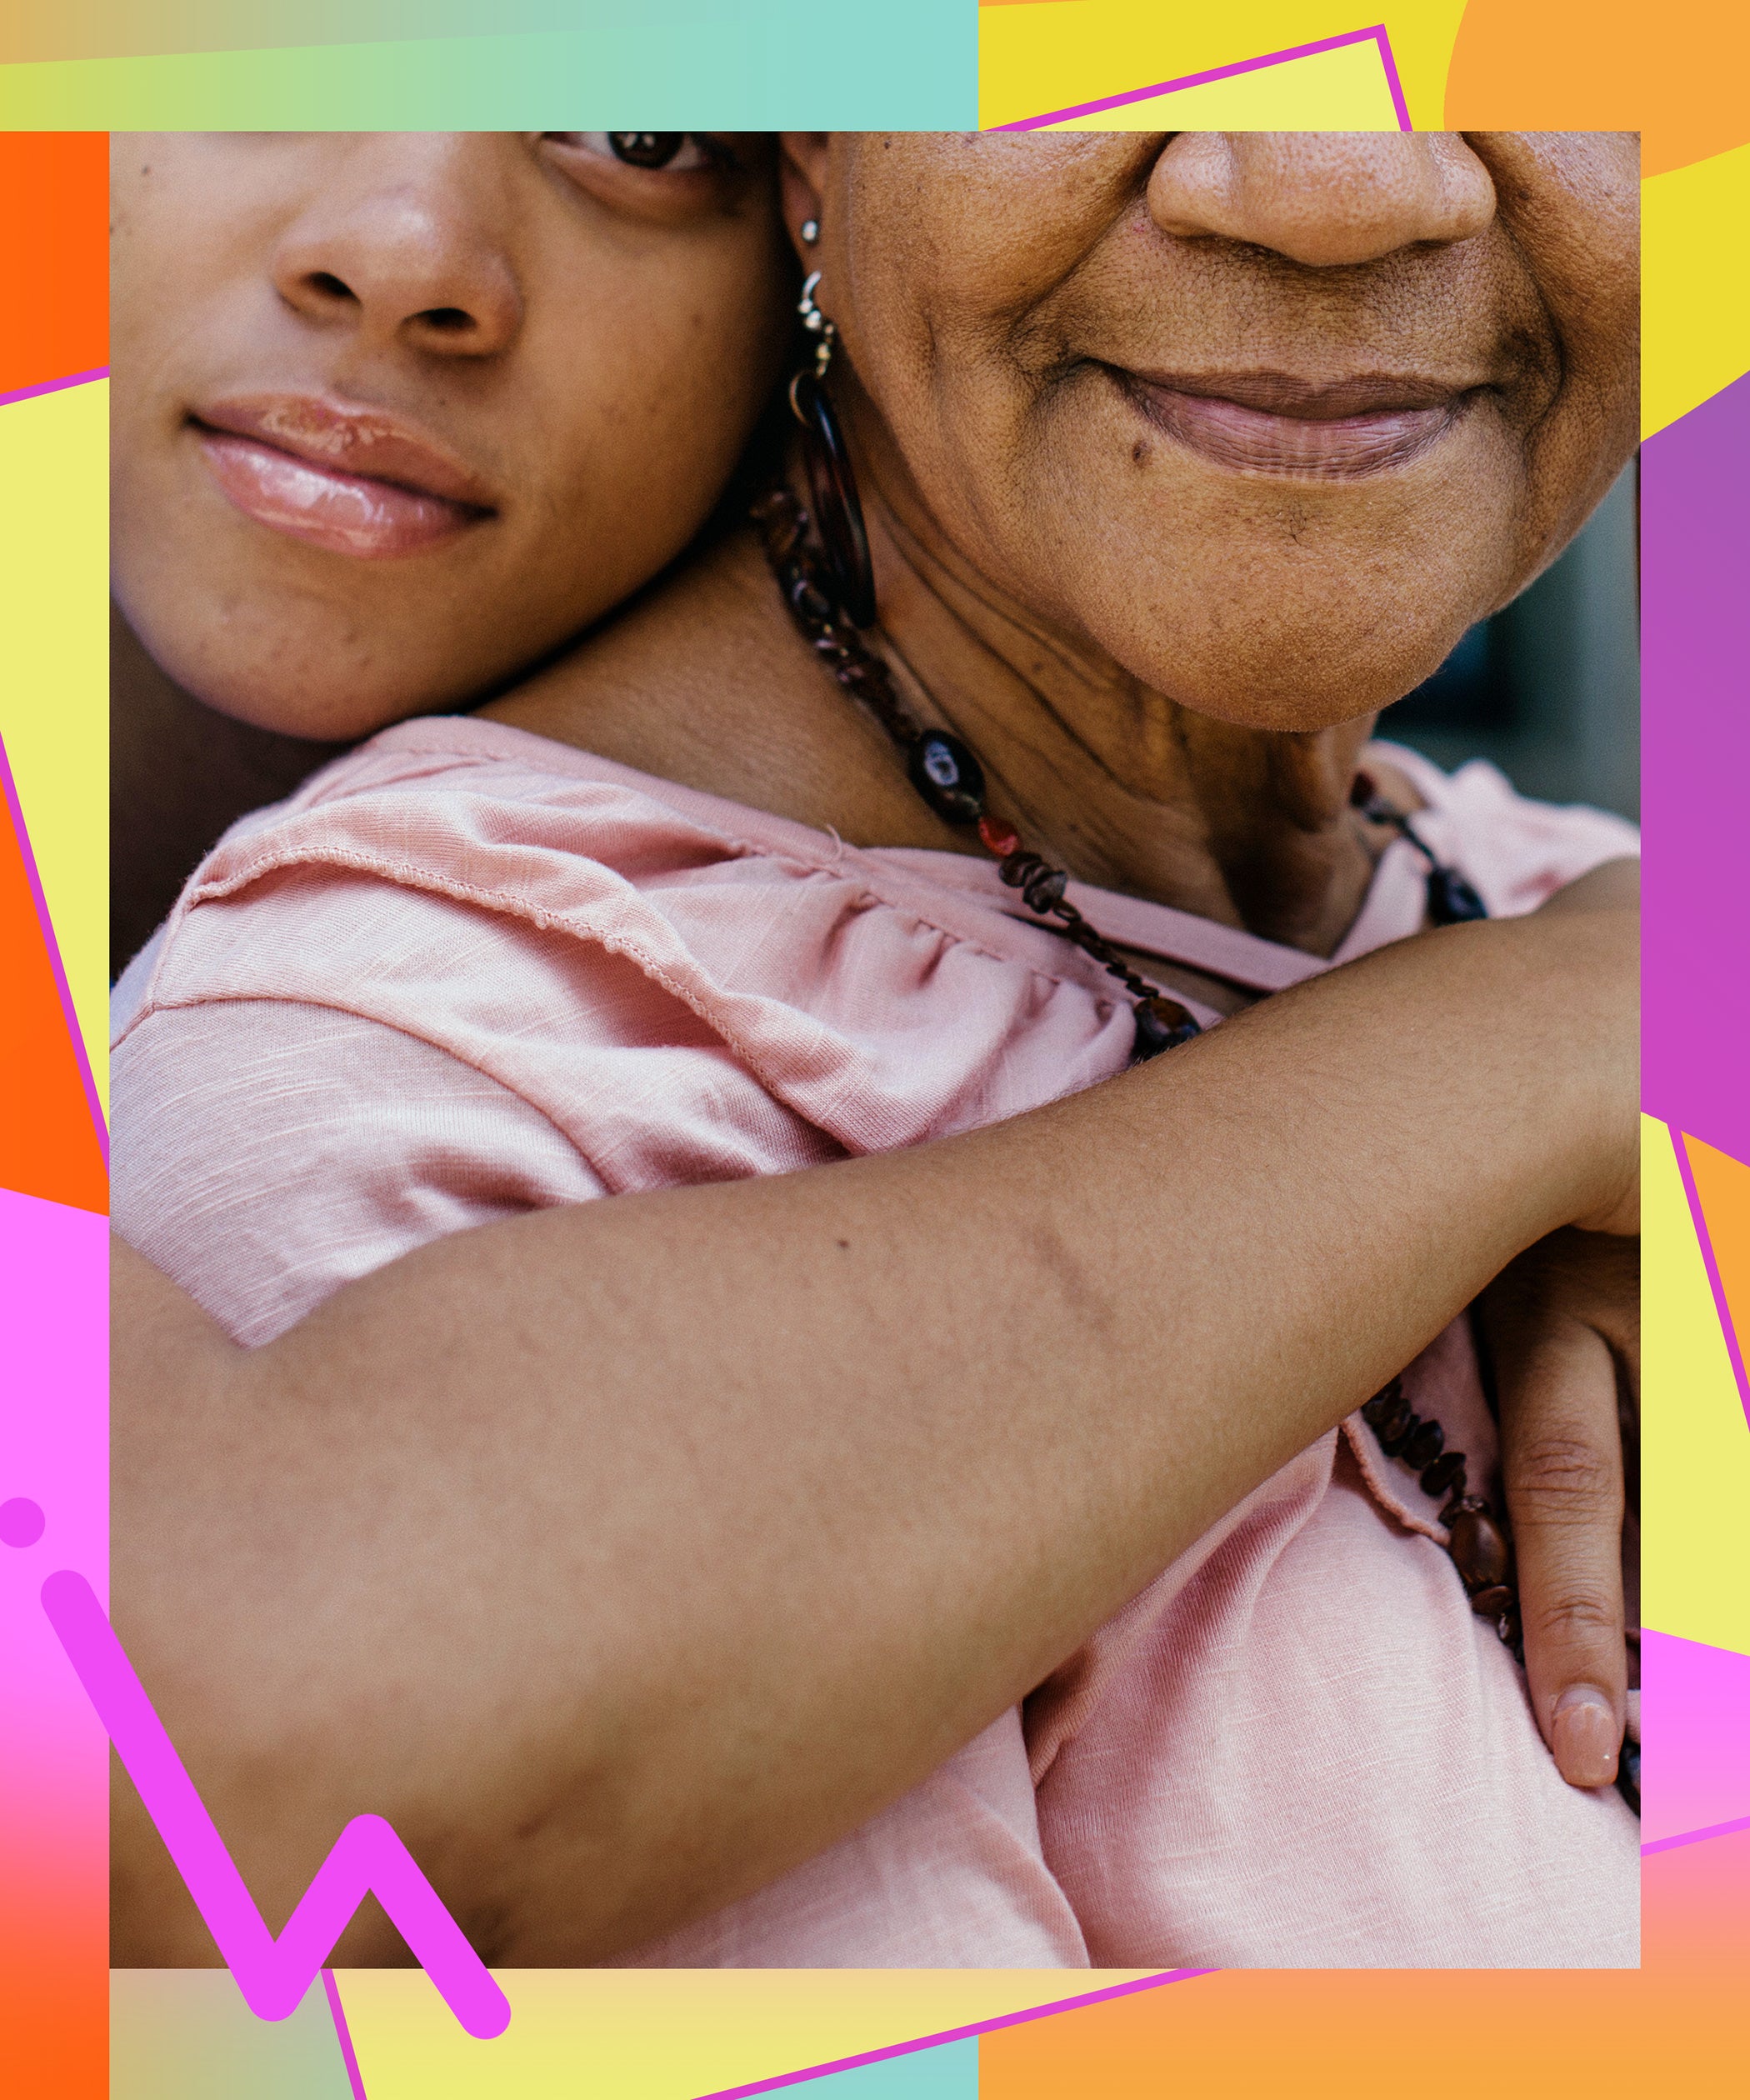 An Ode To The Black Grandmother Who Raised Me